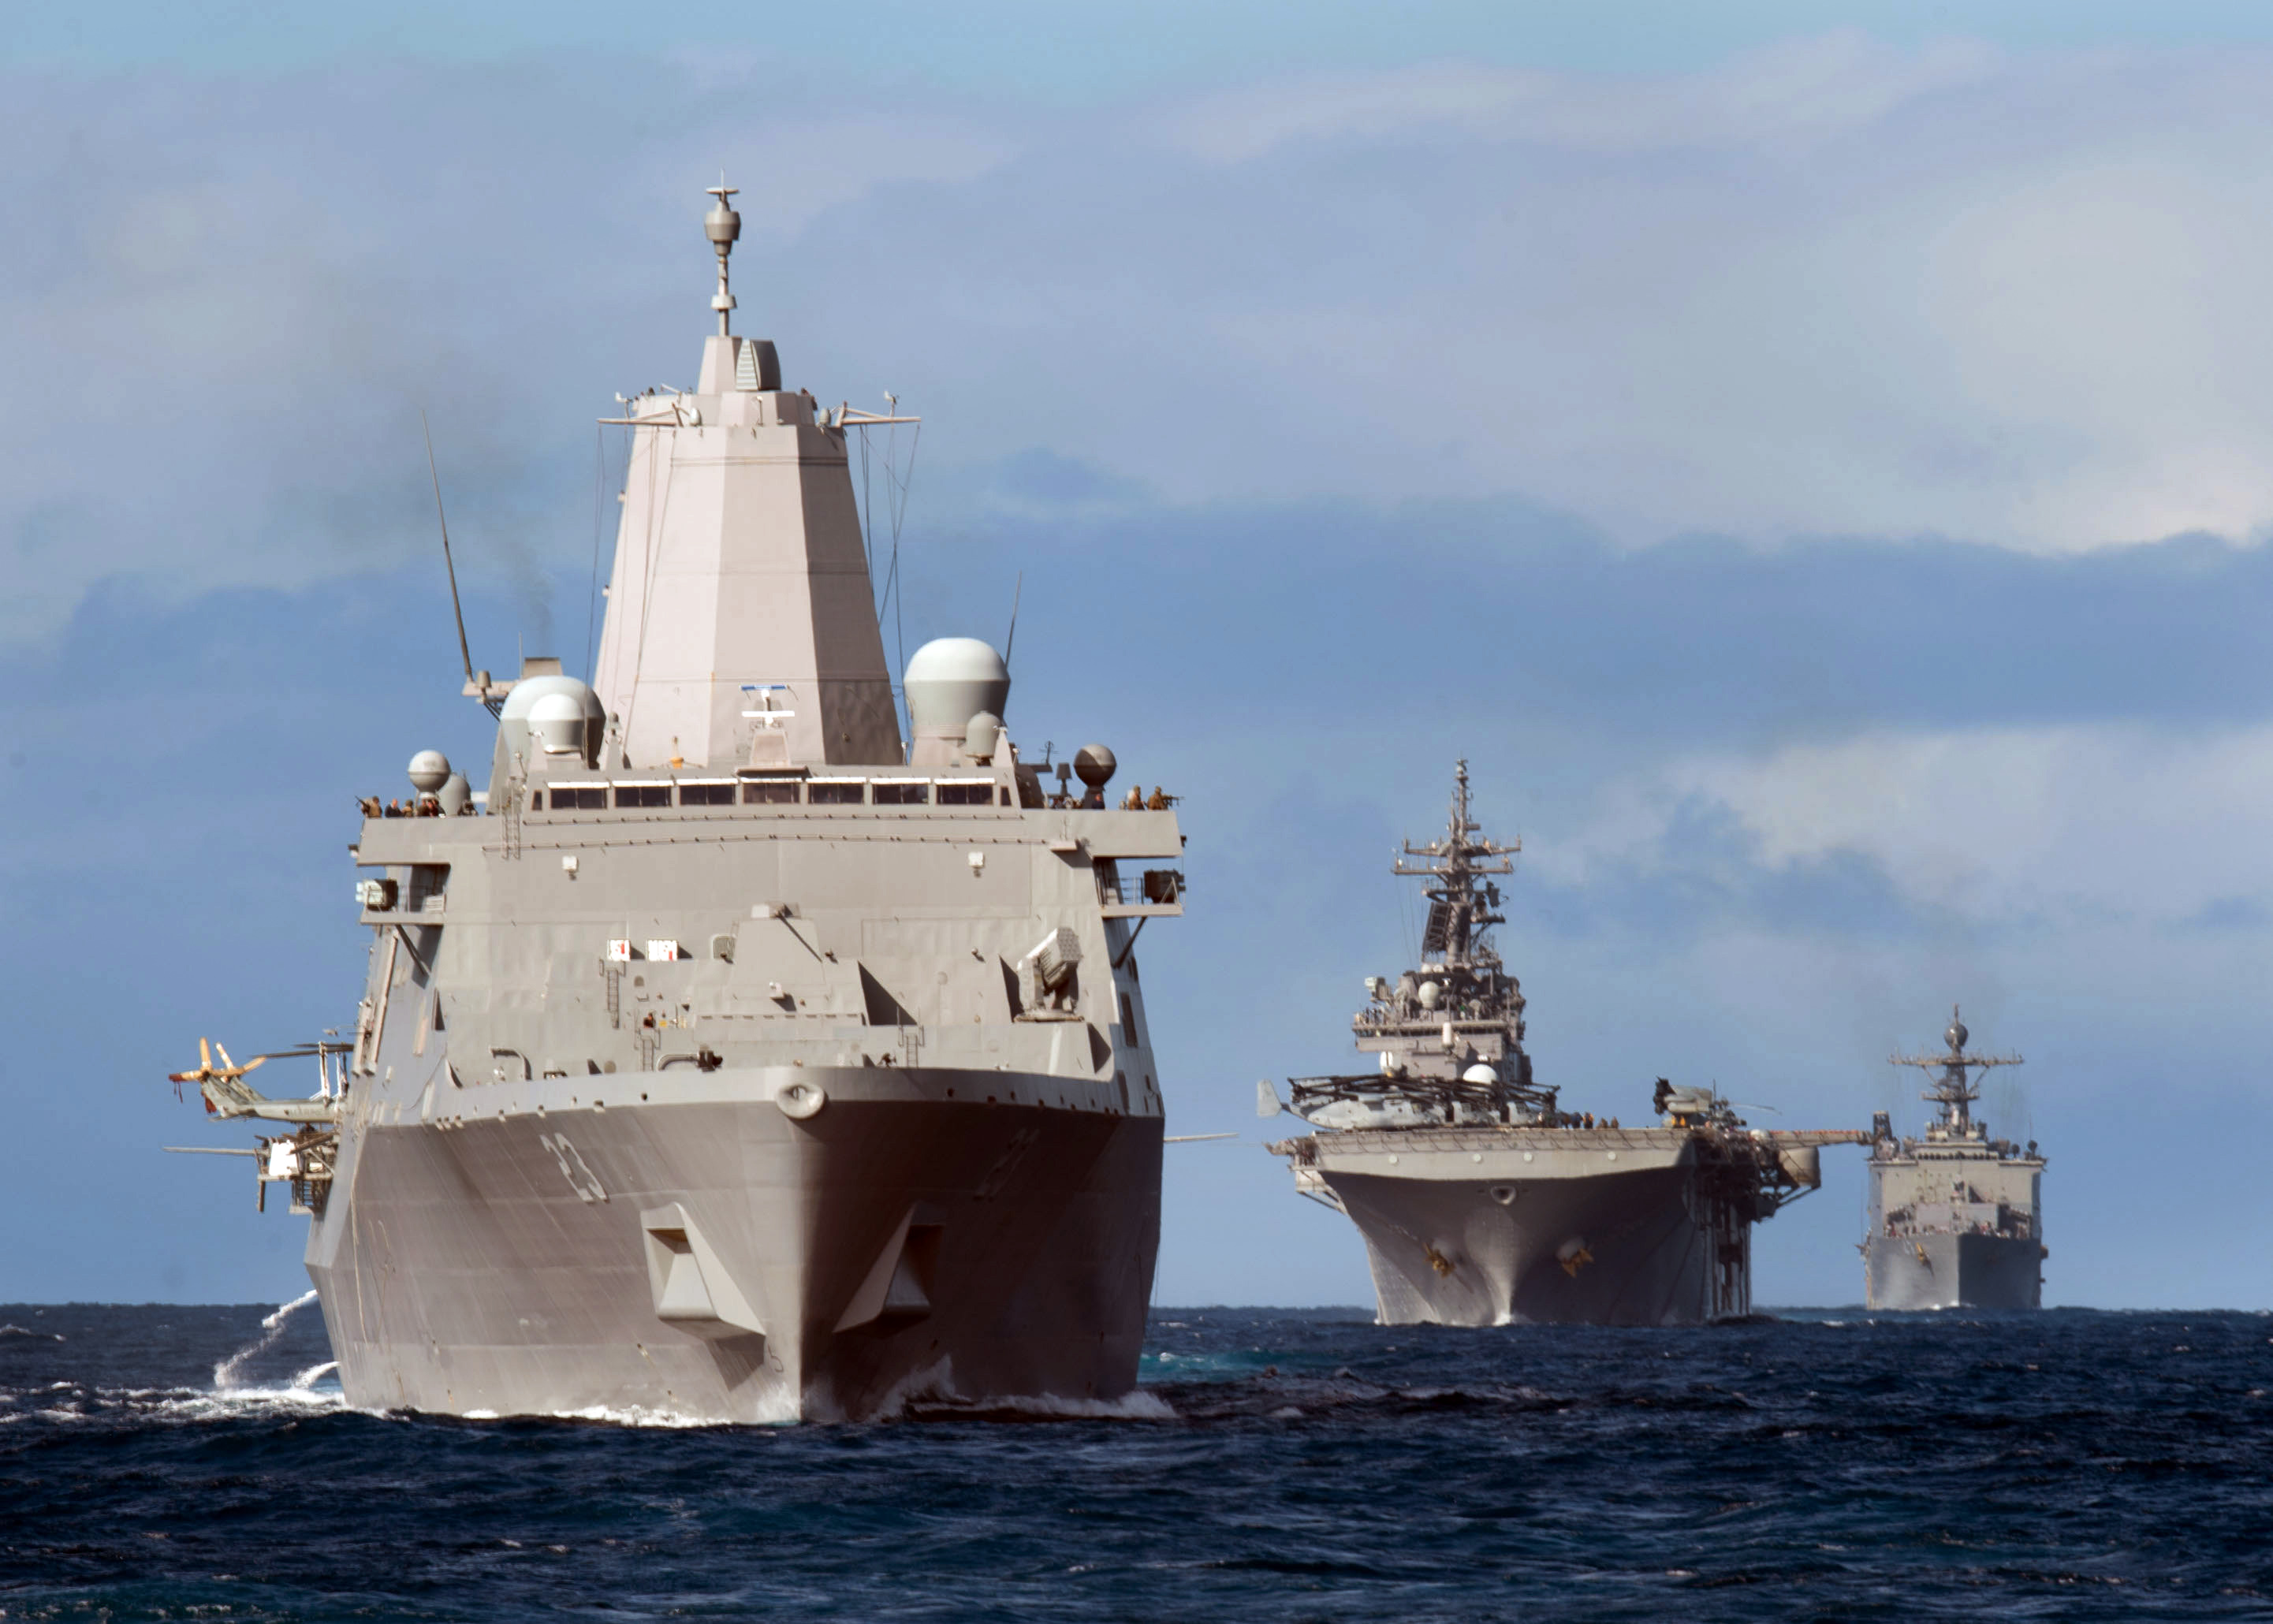 Essex ARG consists of the Wasp-class amphibious assault ship USS Essex (LHD-2), the San Antonio-class transport dock ship USS Anchorage (LPD-23), and the Whidbey Island-class amphibious landing dock ship USS Rushmore (LSD-47) on Feb. 28, 2015. US Navy Photo 